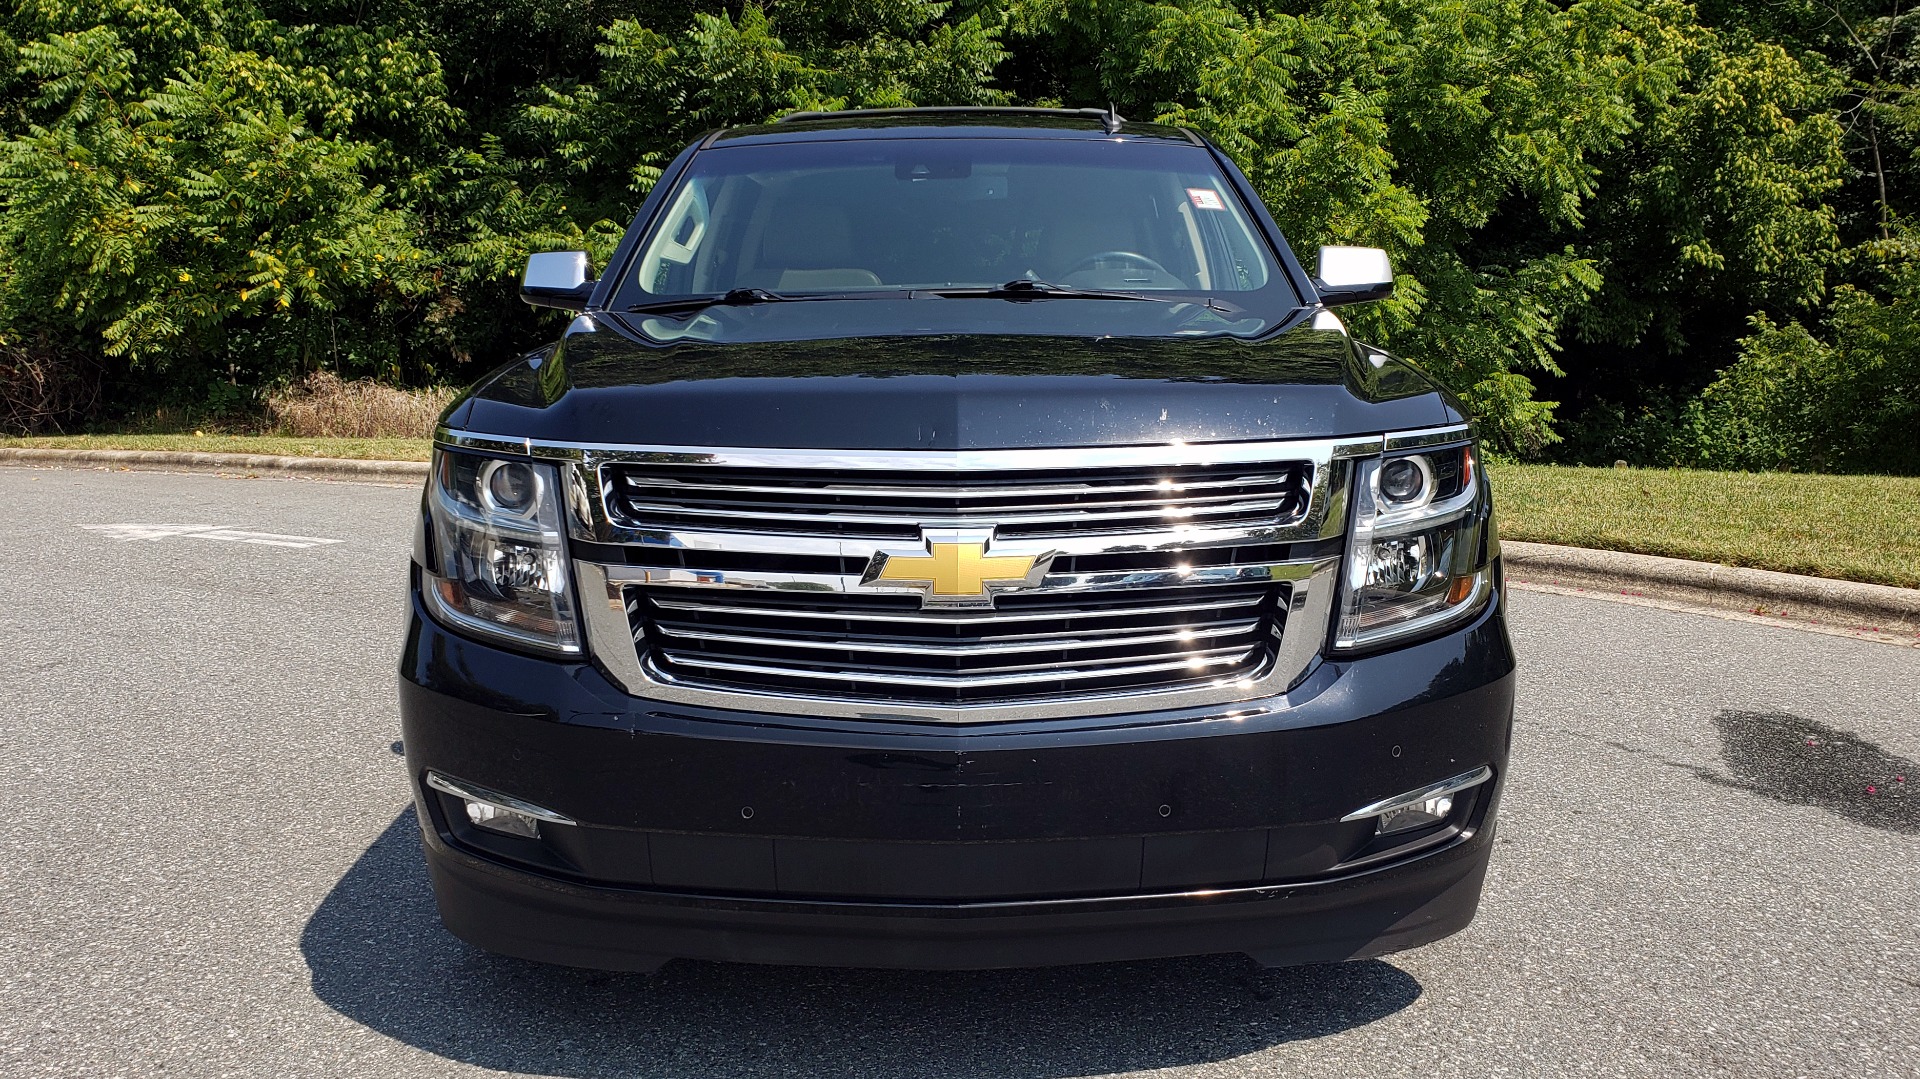 Used 2015 Chevrolet SURBURBAN LTZ 4WD / NAV / SUNROOF / 3-ROW / ENTERTAINMENT / REARVIEW for sale Sold at Formula Imports in Charlotte NC 28227 61